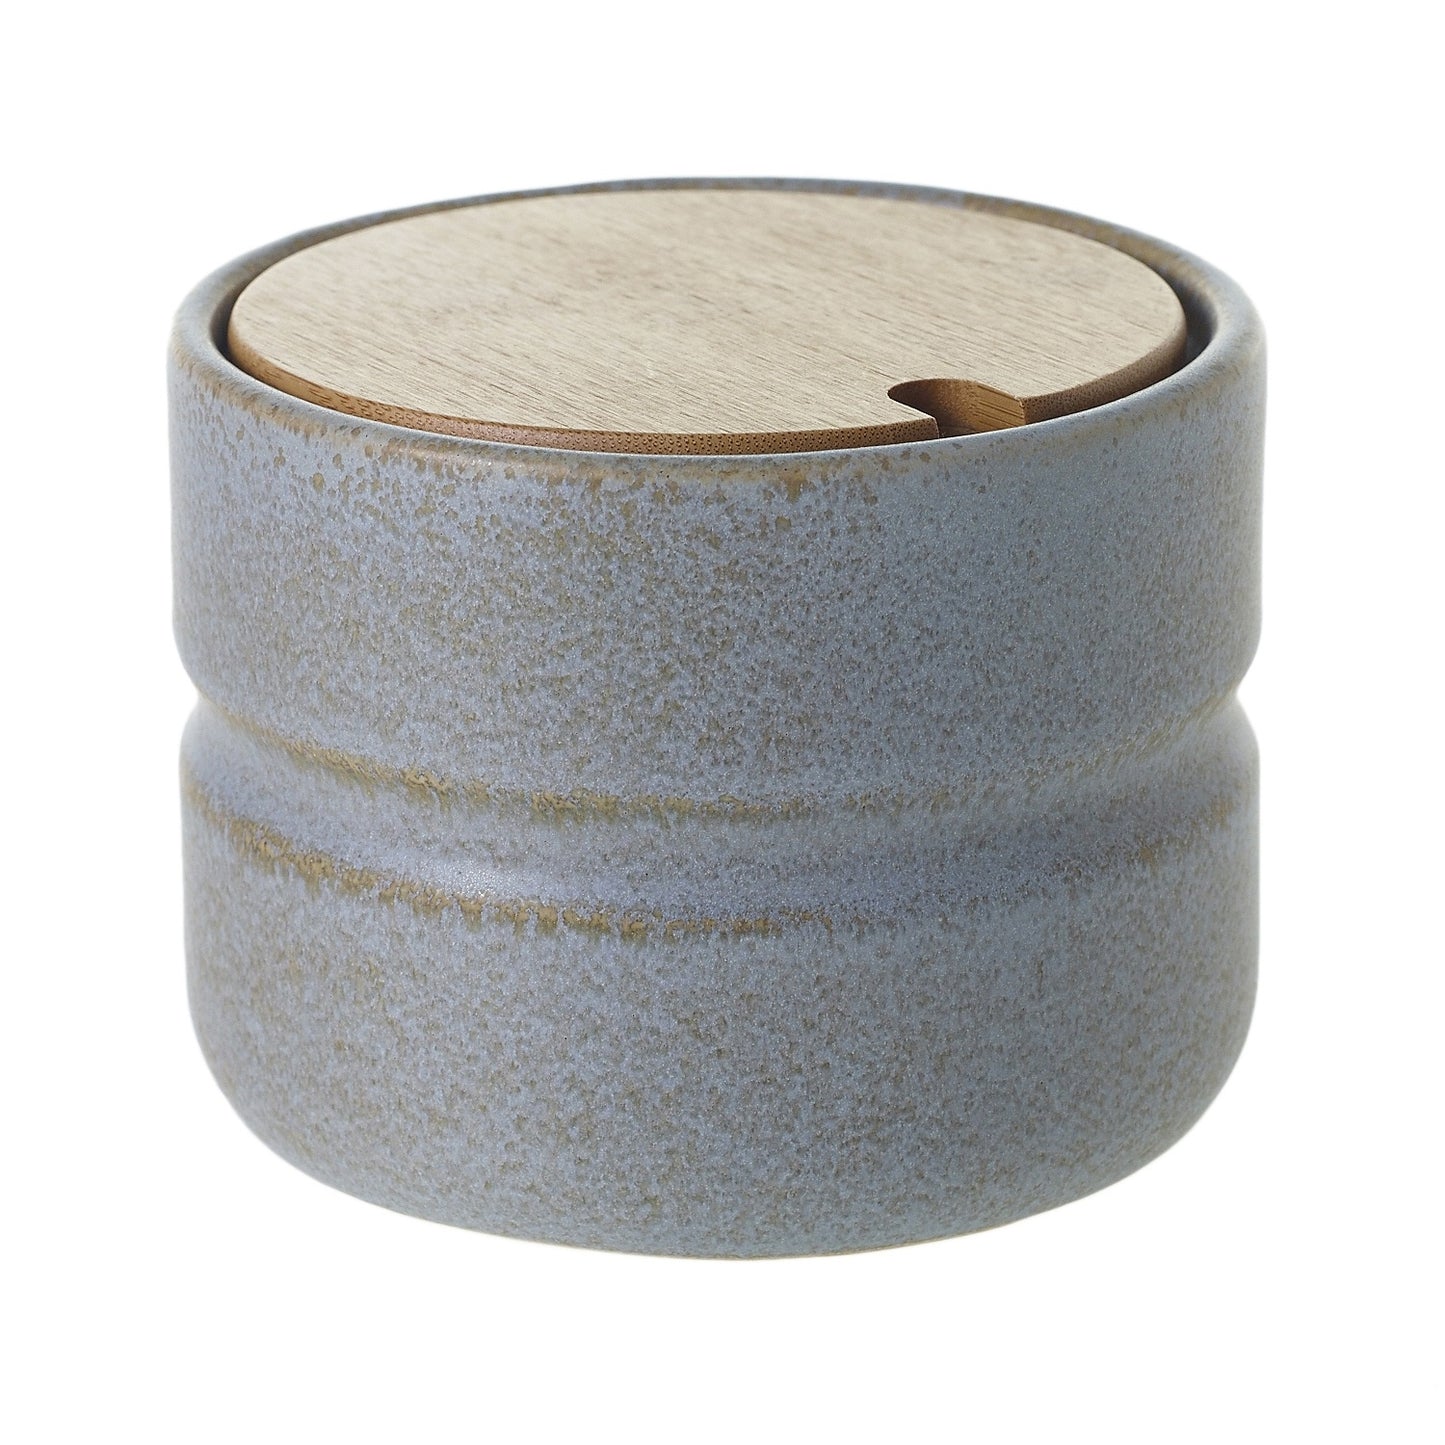 Tate Canister 5.25"x 4"